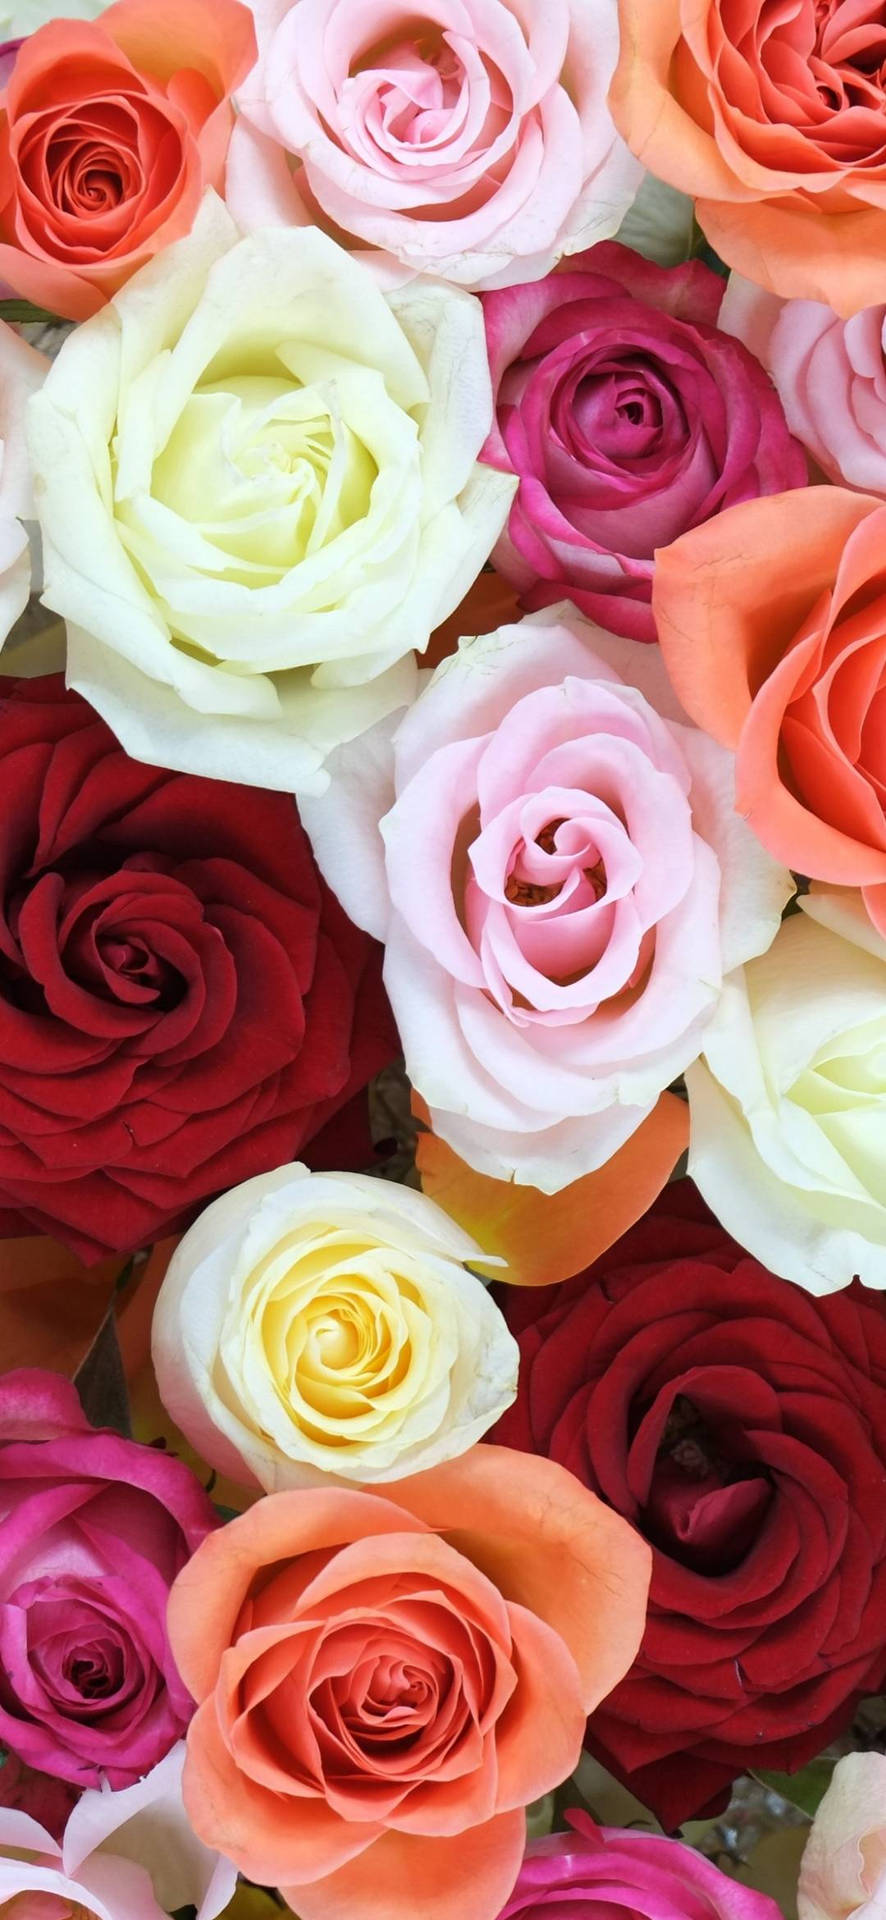 Roses In Different Colors Flower Phone Wallpaper